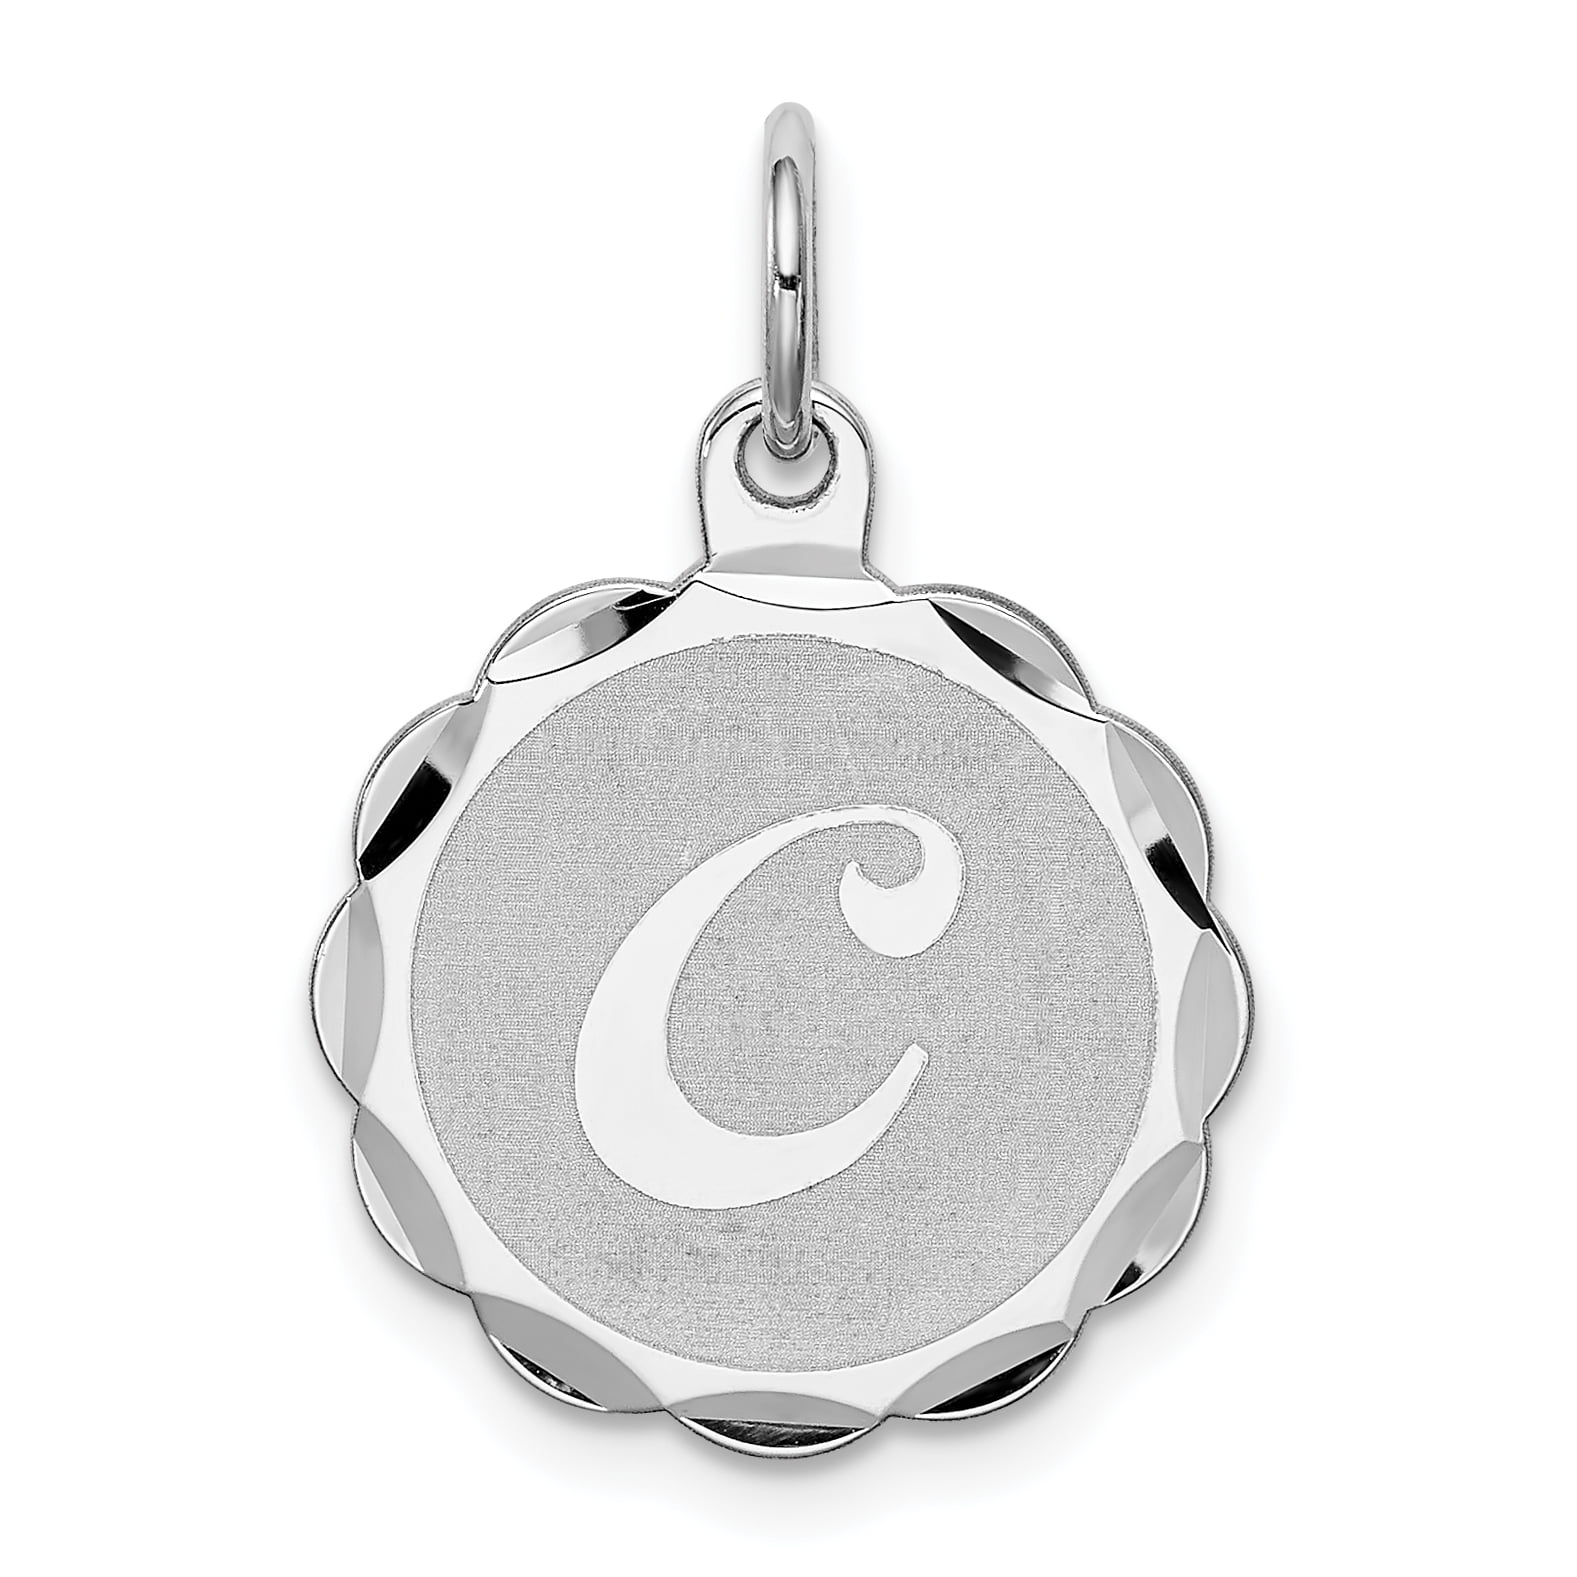 925 Sterling Silver Initial C Charm and Pendant